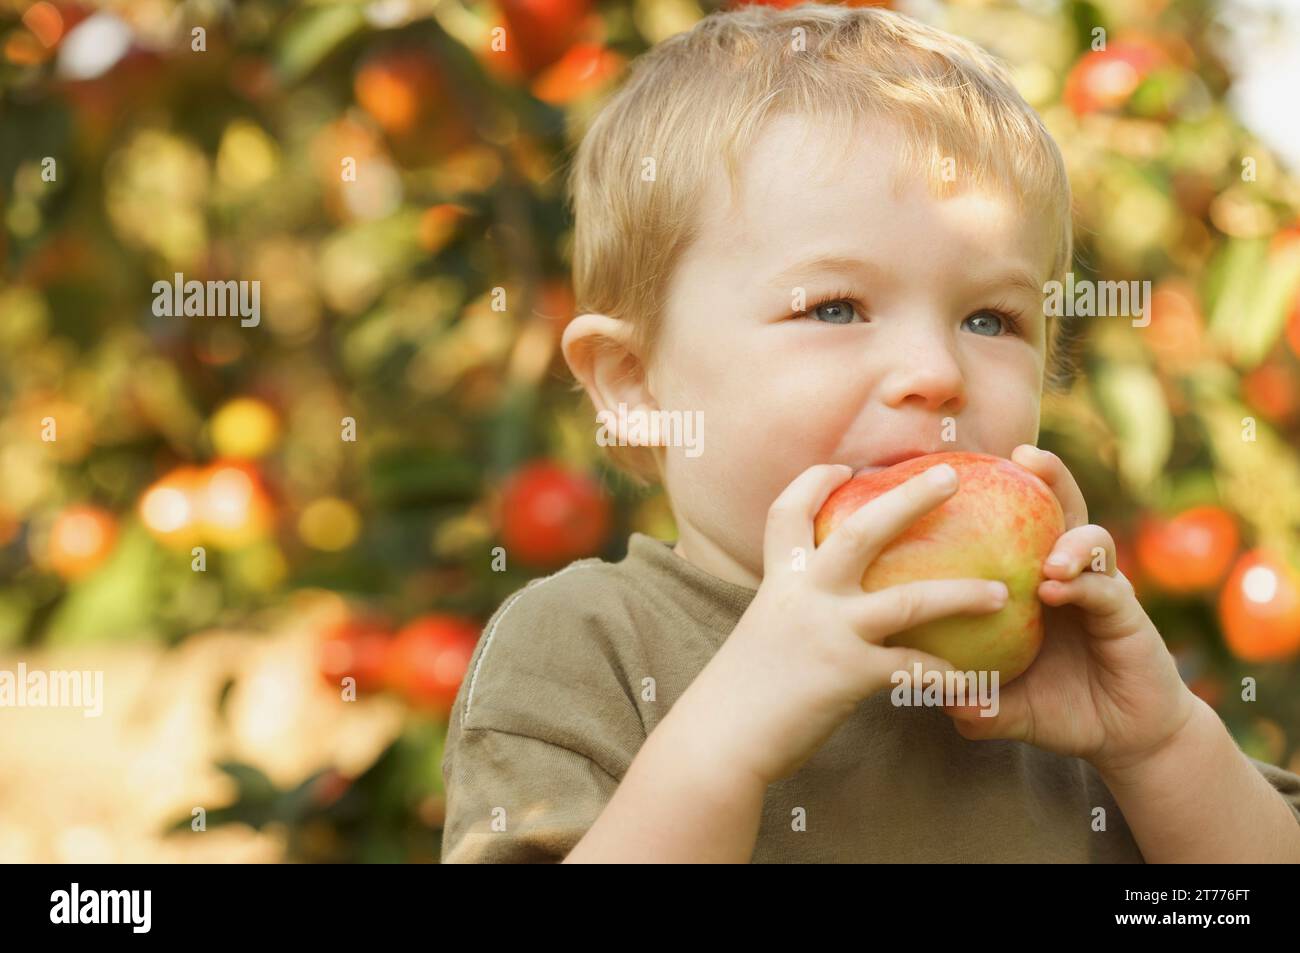 Close up of a young boy standing in an apple orchard biting an apple Stock Photo